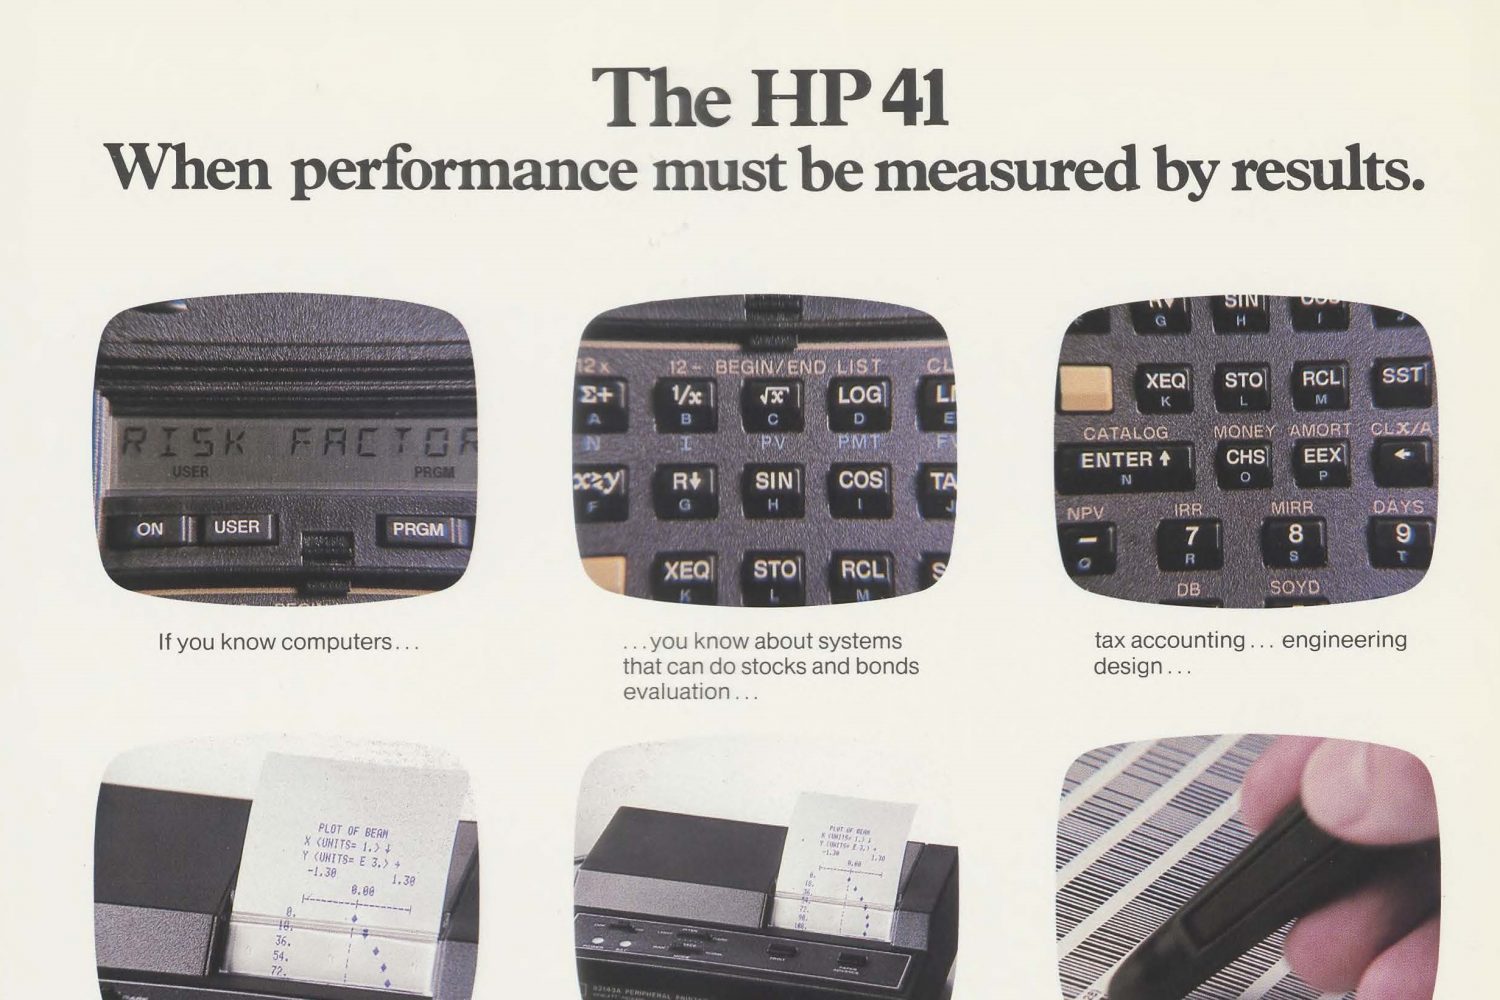 A print ad for the HP 41 pointing out how the calculator will be used on television, specifically on ABC.